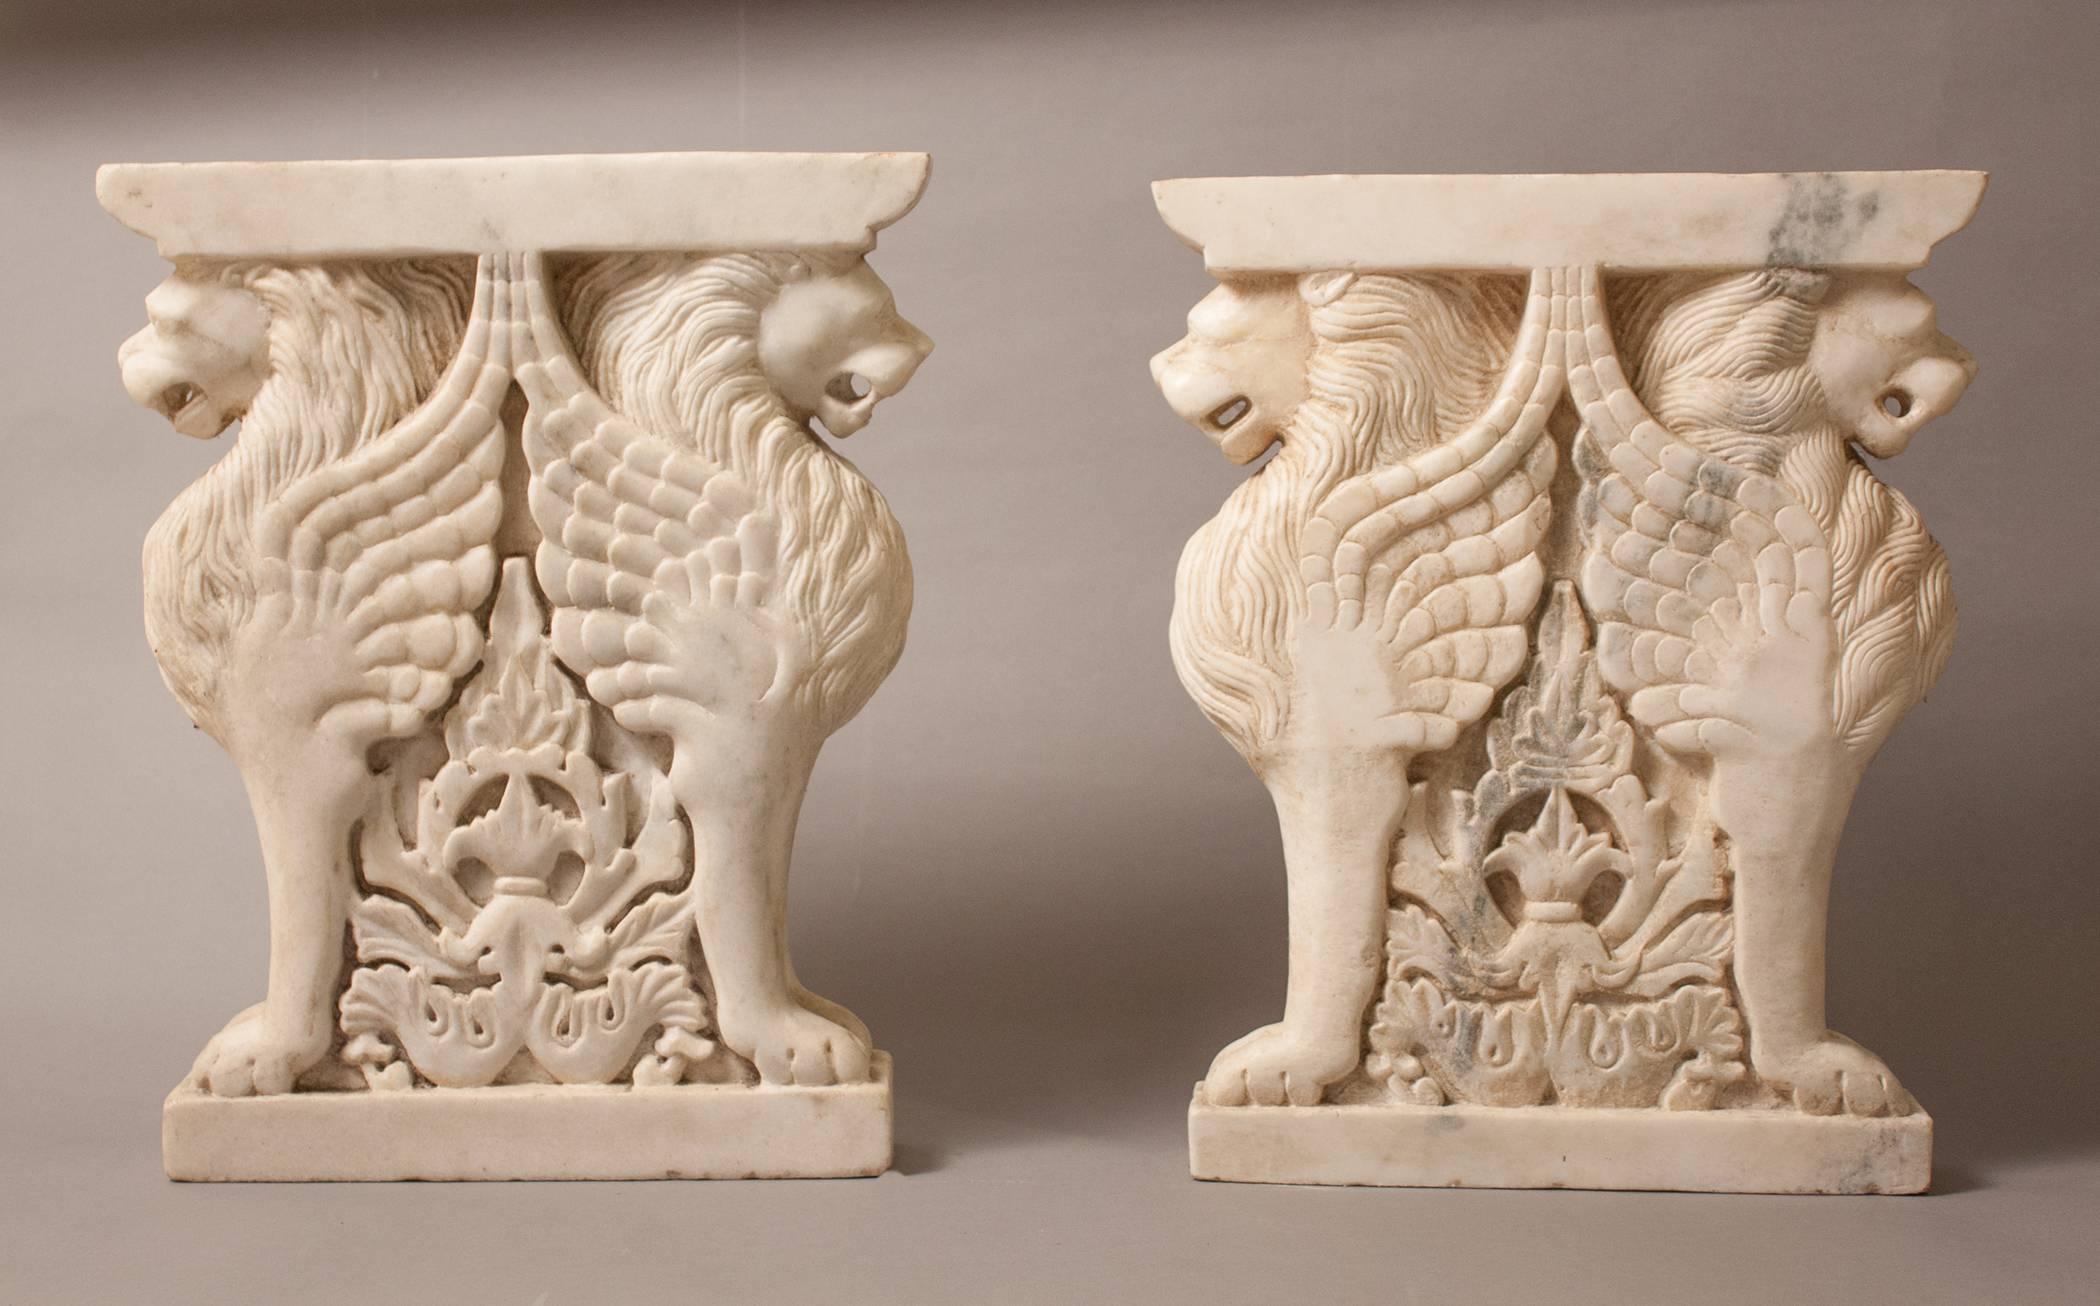 A pair of hand carved white marble bench supports, with attractive veining, that features winged lion sentries and an attractive carved centerpiece relief. With a complementary slab of marble or stone on top, they will make a beautiful bench for a